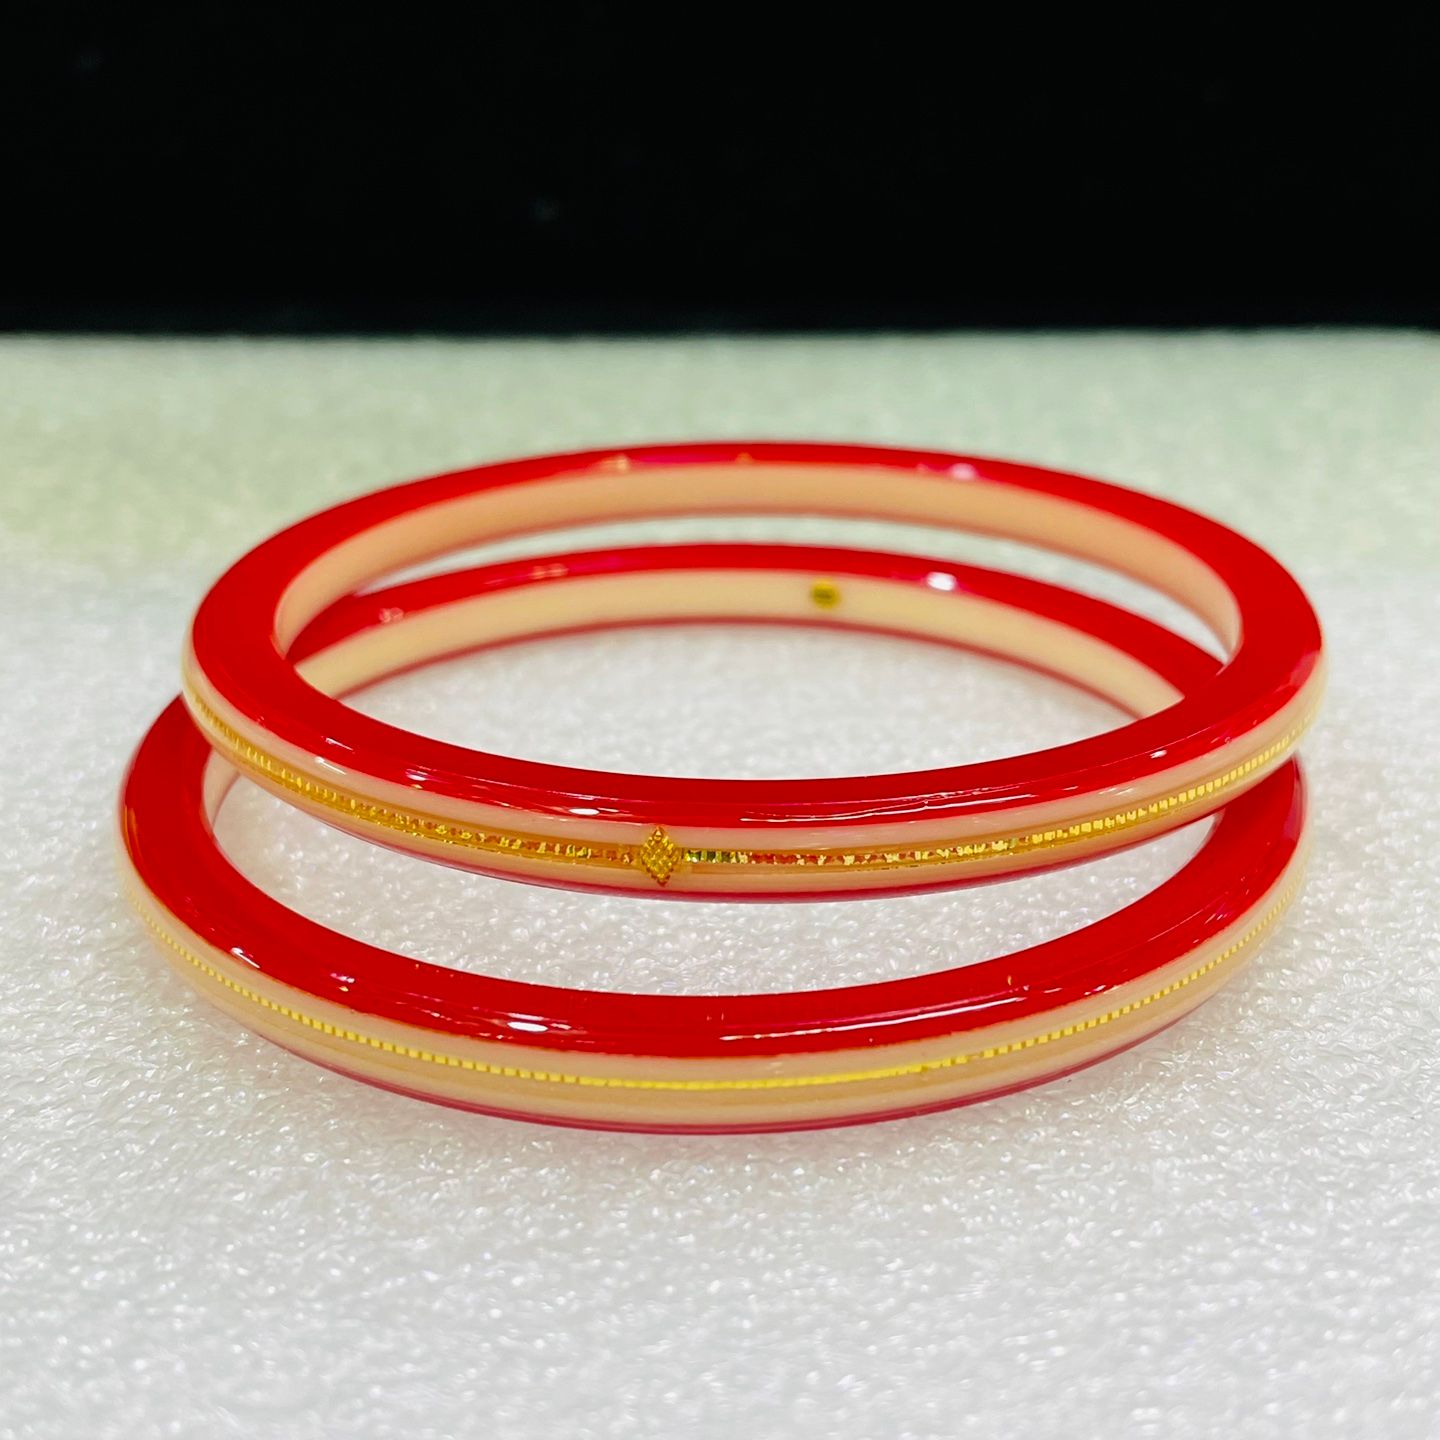 Handmade Shakha Pola Gold Plated Acrylic Bangle for Women, Red and White  Pack of 4 - Etsy